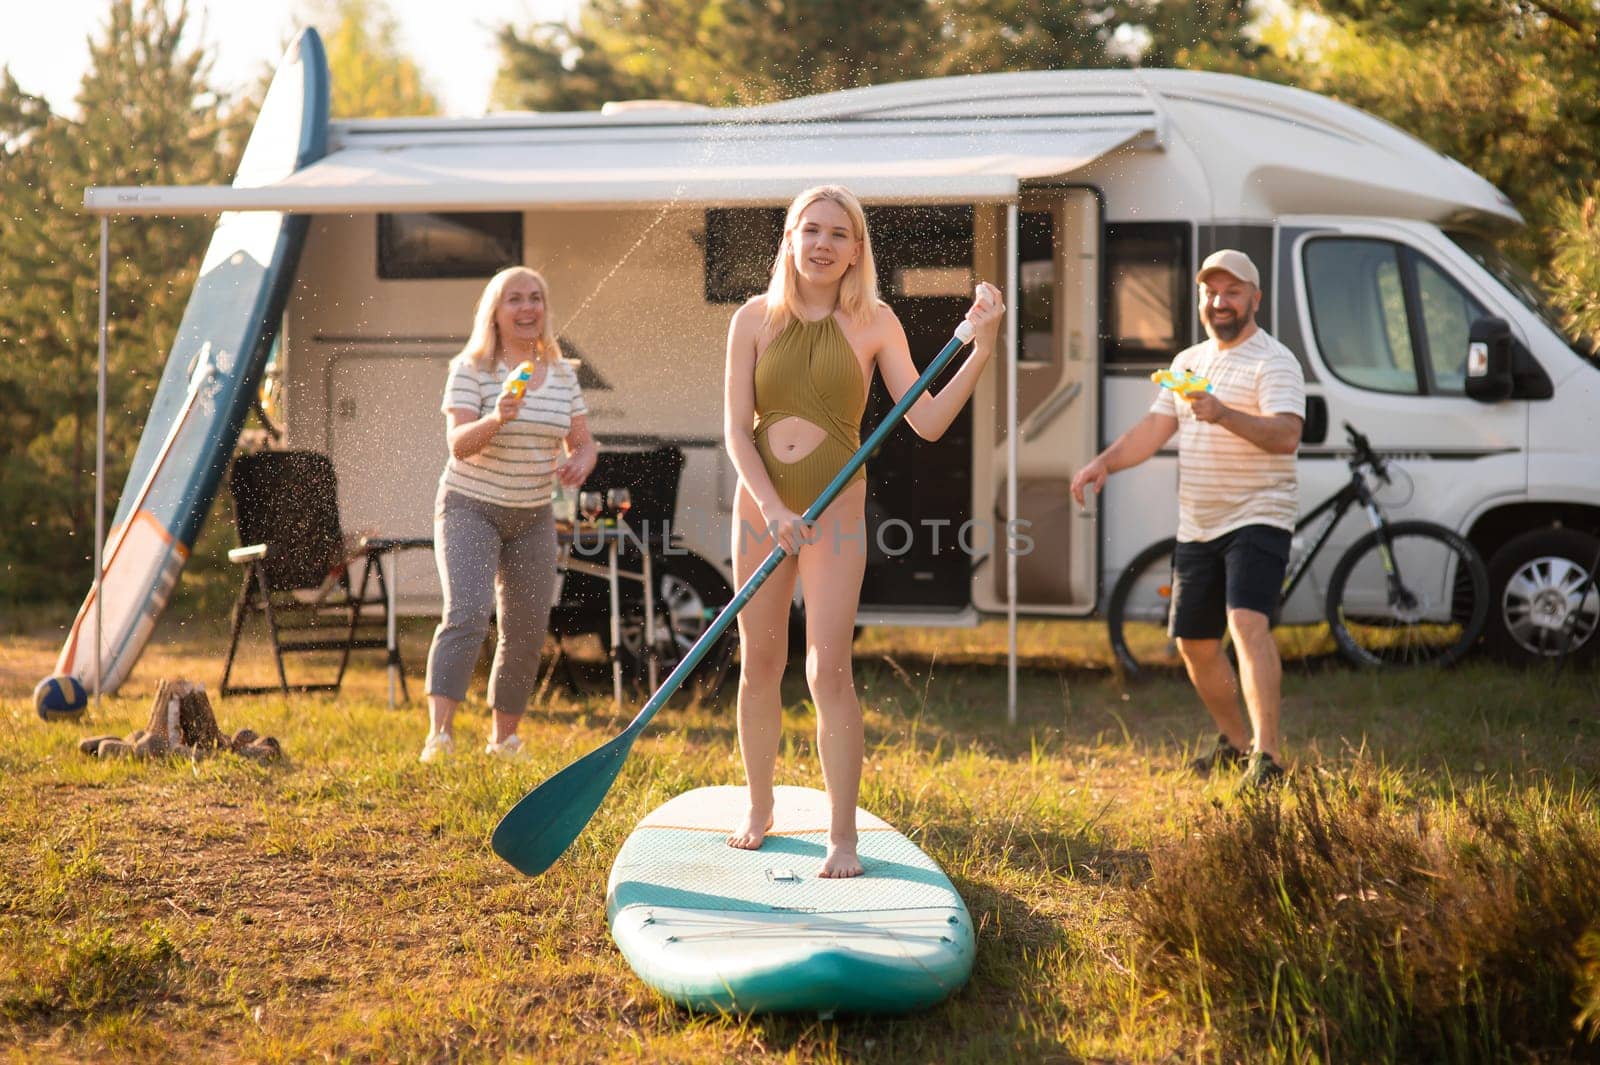 the family is resting next to their mobile home. My daughter is standing with a paddle on a sup board, and her parents pour water on her.